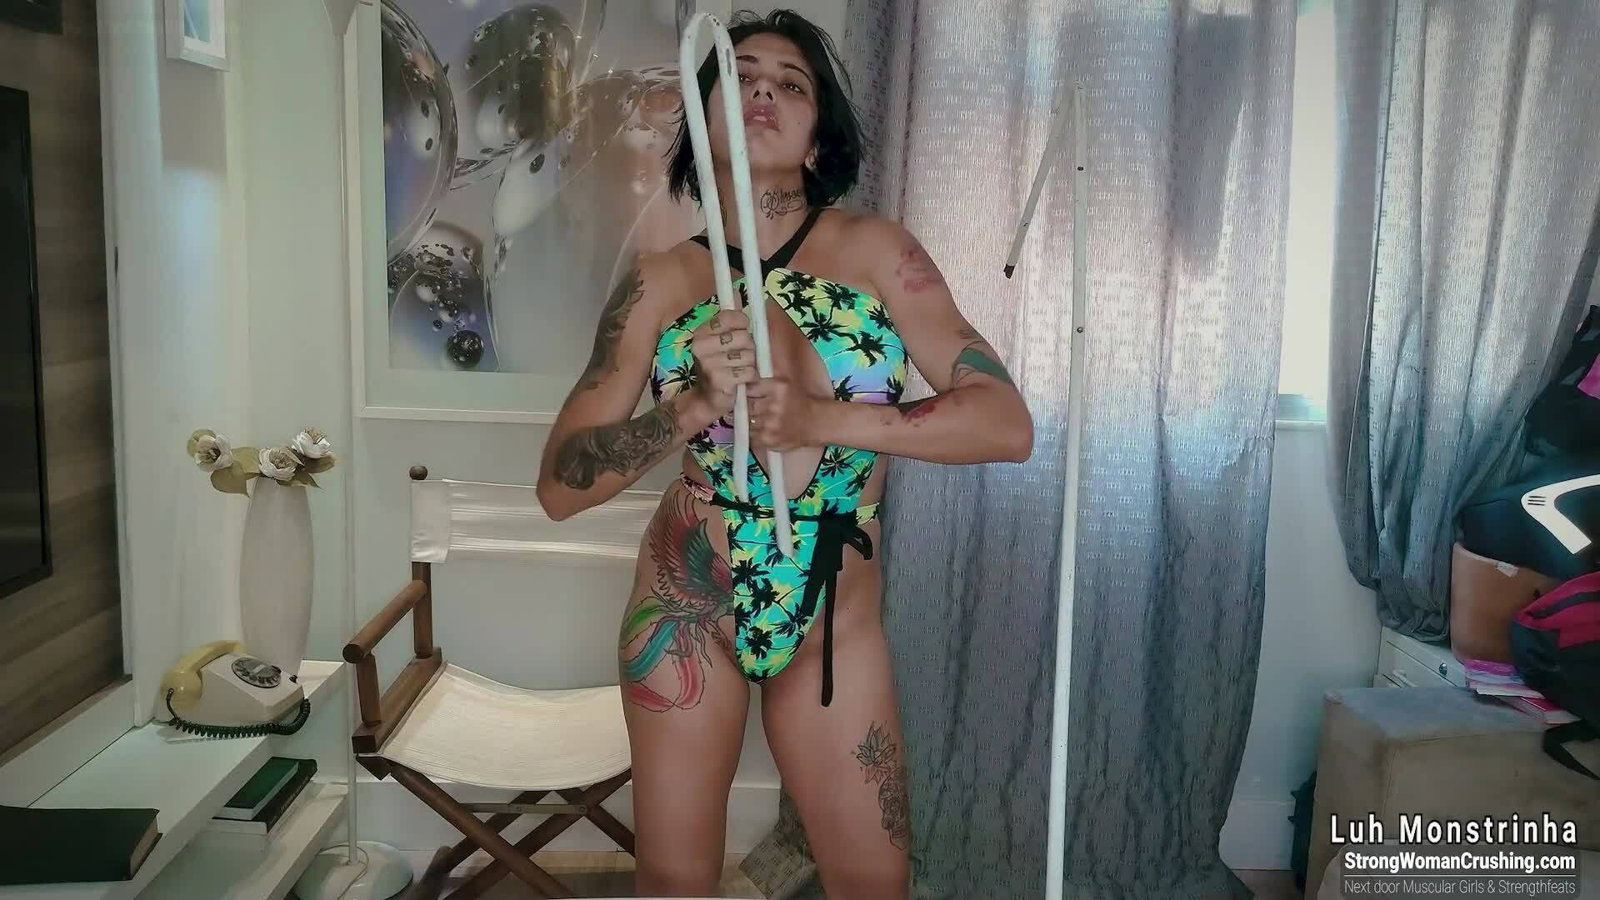 Watch the Photo by MusclegirlStrength with the username @MusclegirlStrength, who is a brand user, posted on August 24, 2023 and the text says '👀🤩Check out the 🔥 new video of Luh Monstrinha smashing a cloth stand in a swimsuit! 🤩💥 Click the link to get your membership and watch it now: https://www.strongwomancrushing.com/ 💪🏻 #LuhMonstrinha #Smash #StrongWomanCrushing #PoolParty..'